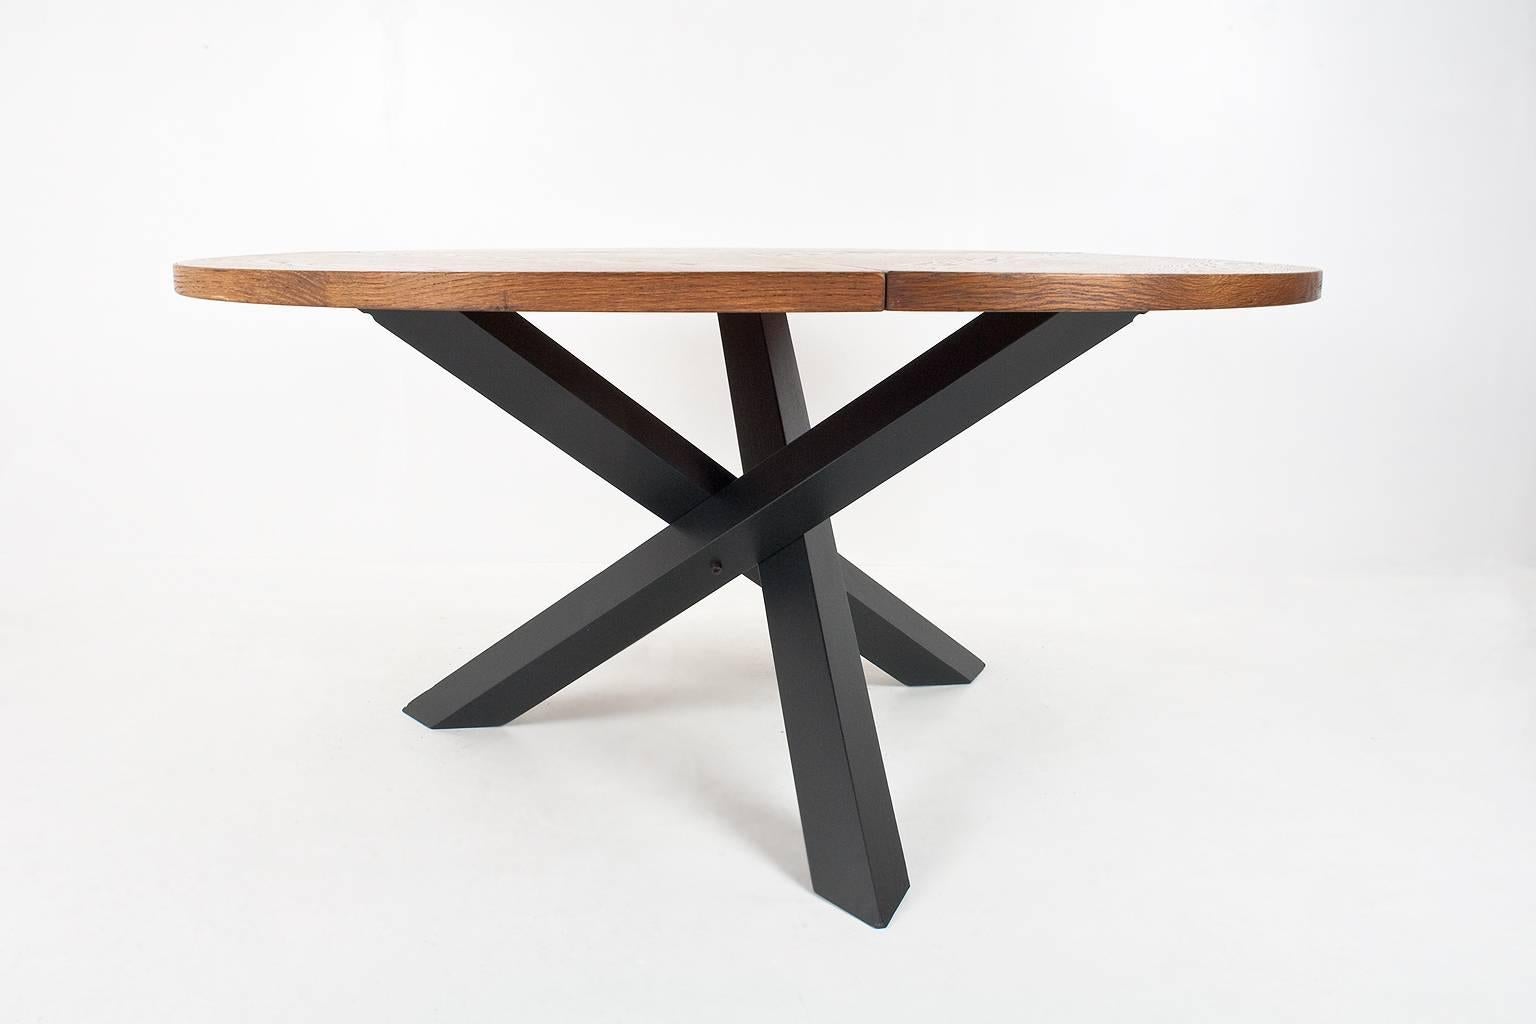 1960s Dutch large dining table with smoked oak tabletop and ebonized legs designed by Martin Visser for 't Spectrum (Holland). The tabletop is divided in three parts and placed on a three crossed legged base. The veneer top shows a beautiful quality